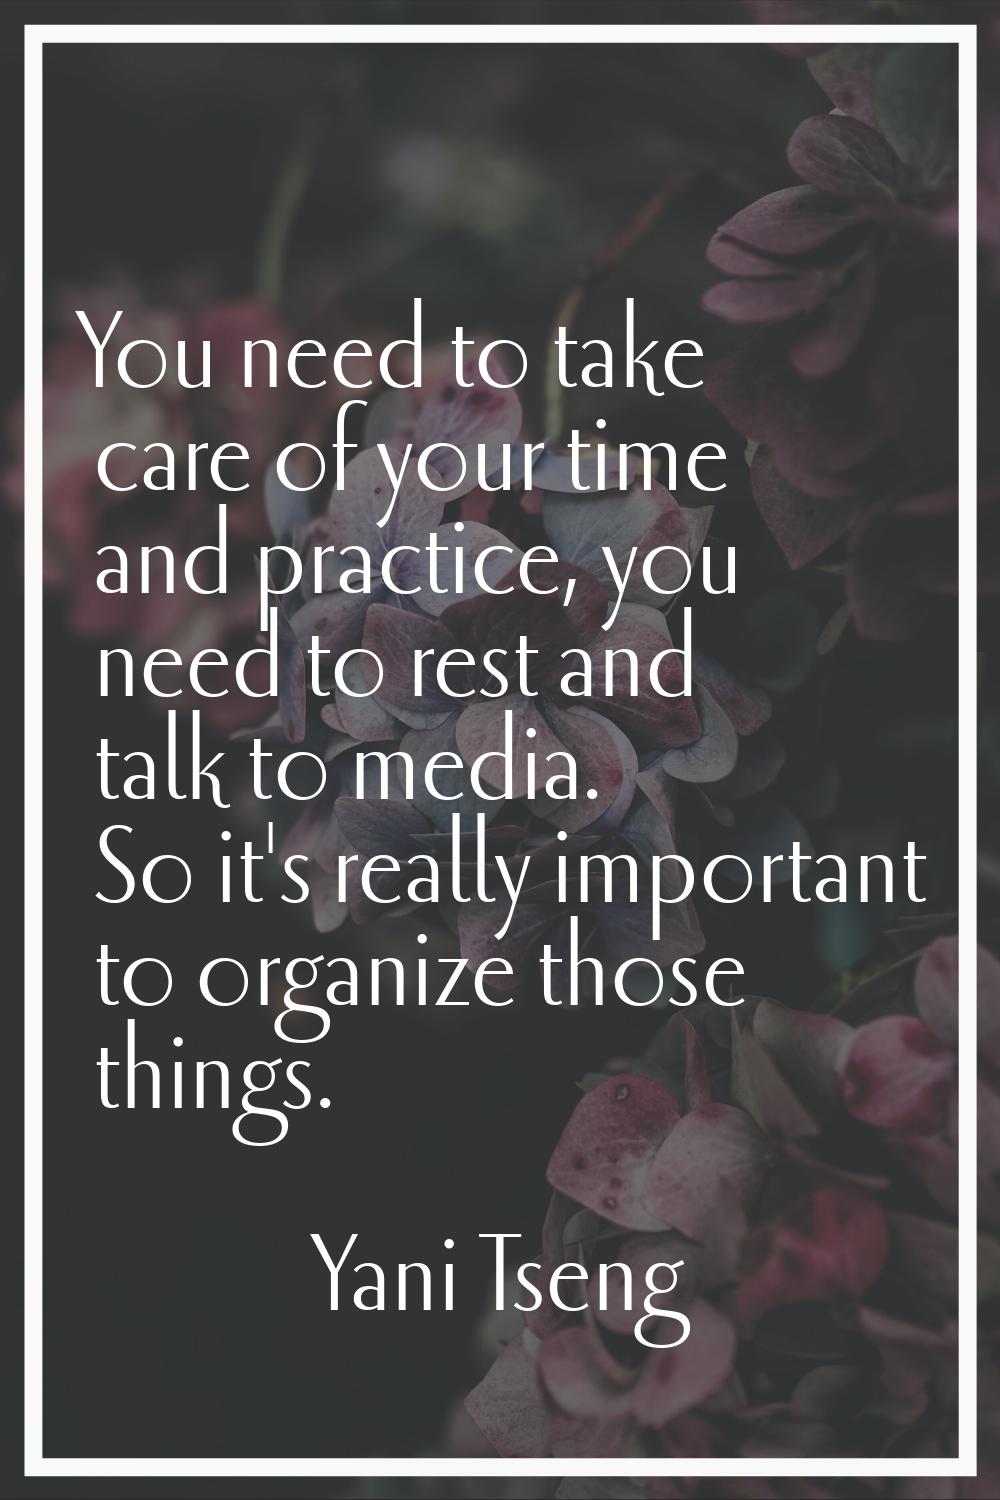 You need to take care of your time and practice, you need to rest and talk to media. So it's really